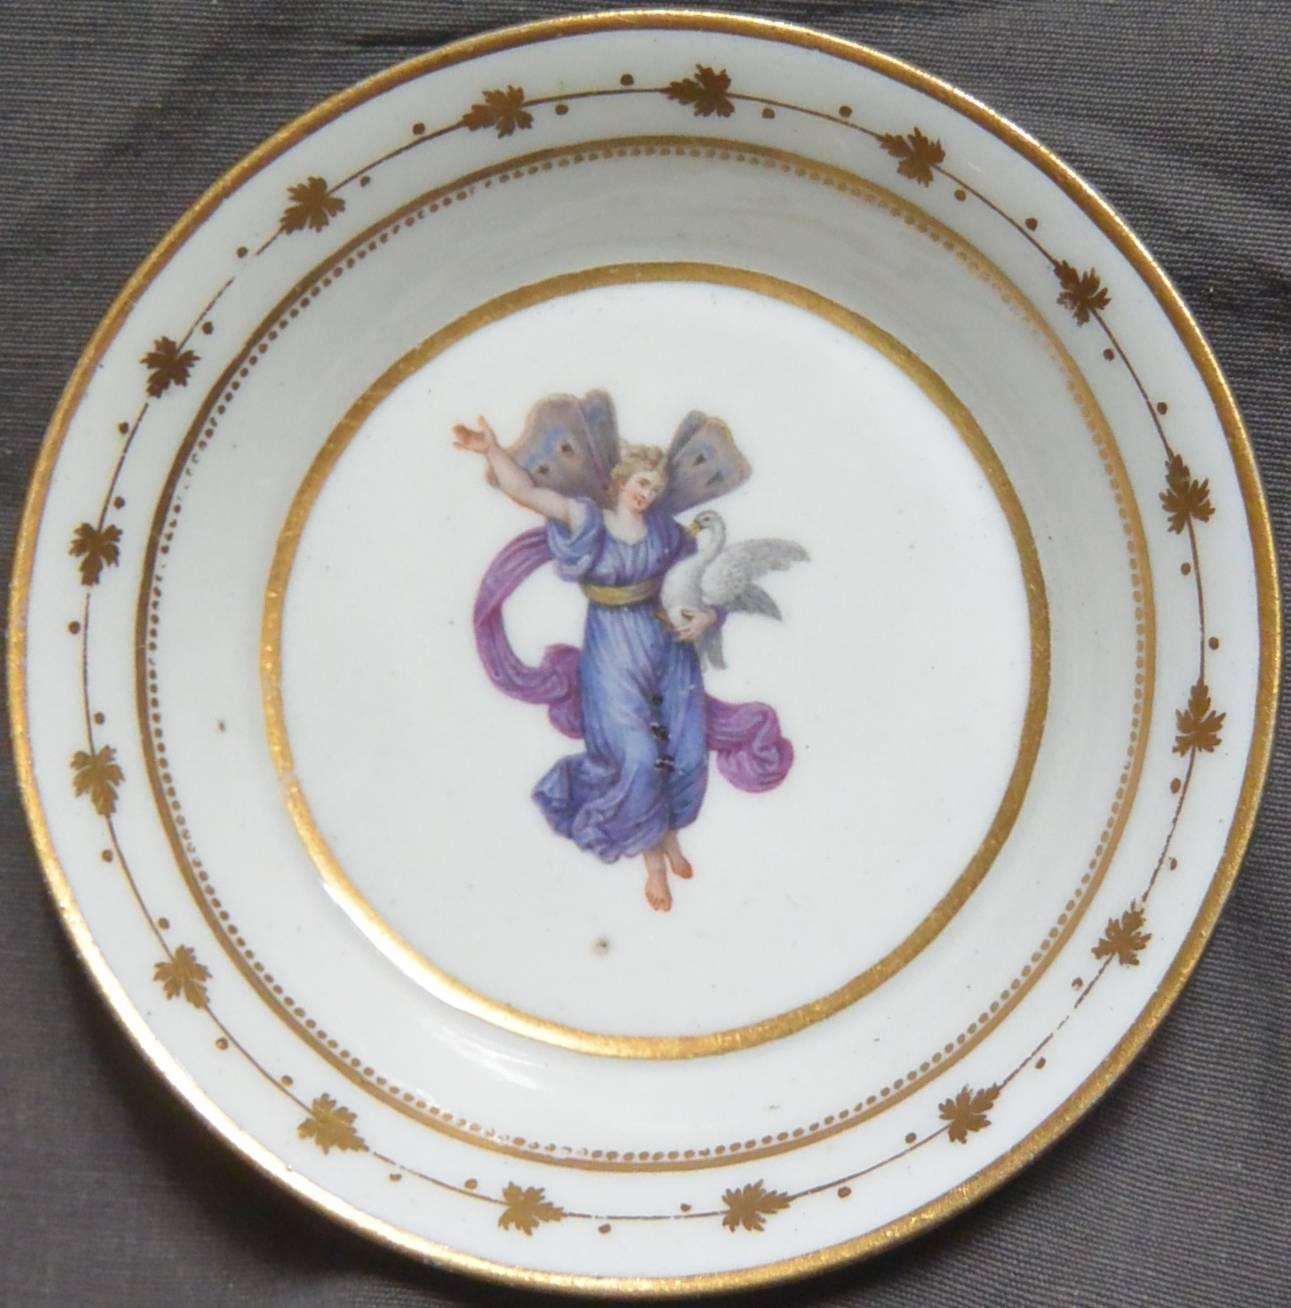 Neoclassical gilt decorated plate with mythological figure. Naples Real Fabbrica Ferdinandea white porcelain painted and gilt decorated saucer dish with Leda and the swan bordered by grape leaf banding. Italy, circa 1795
Dimension: 5.75